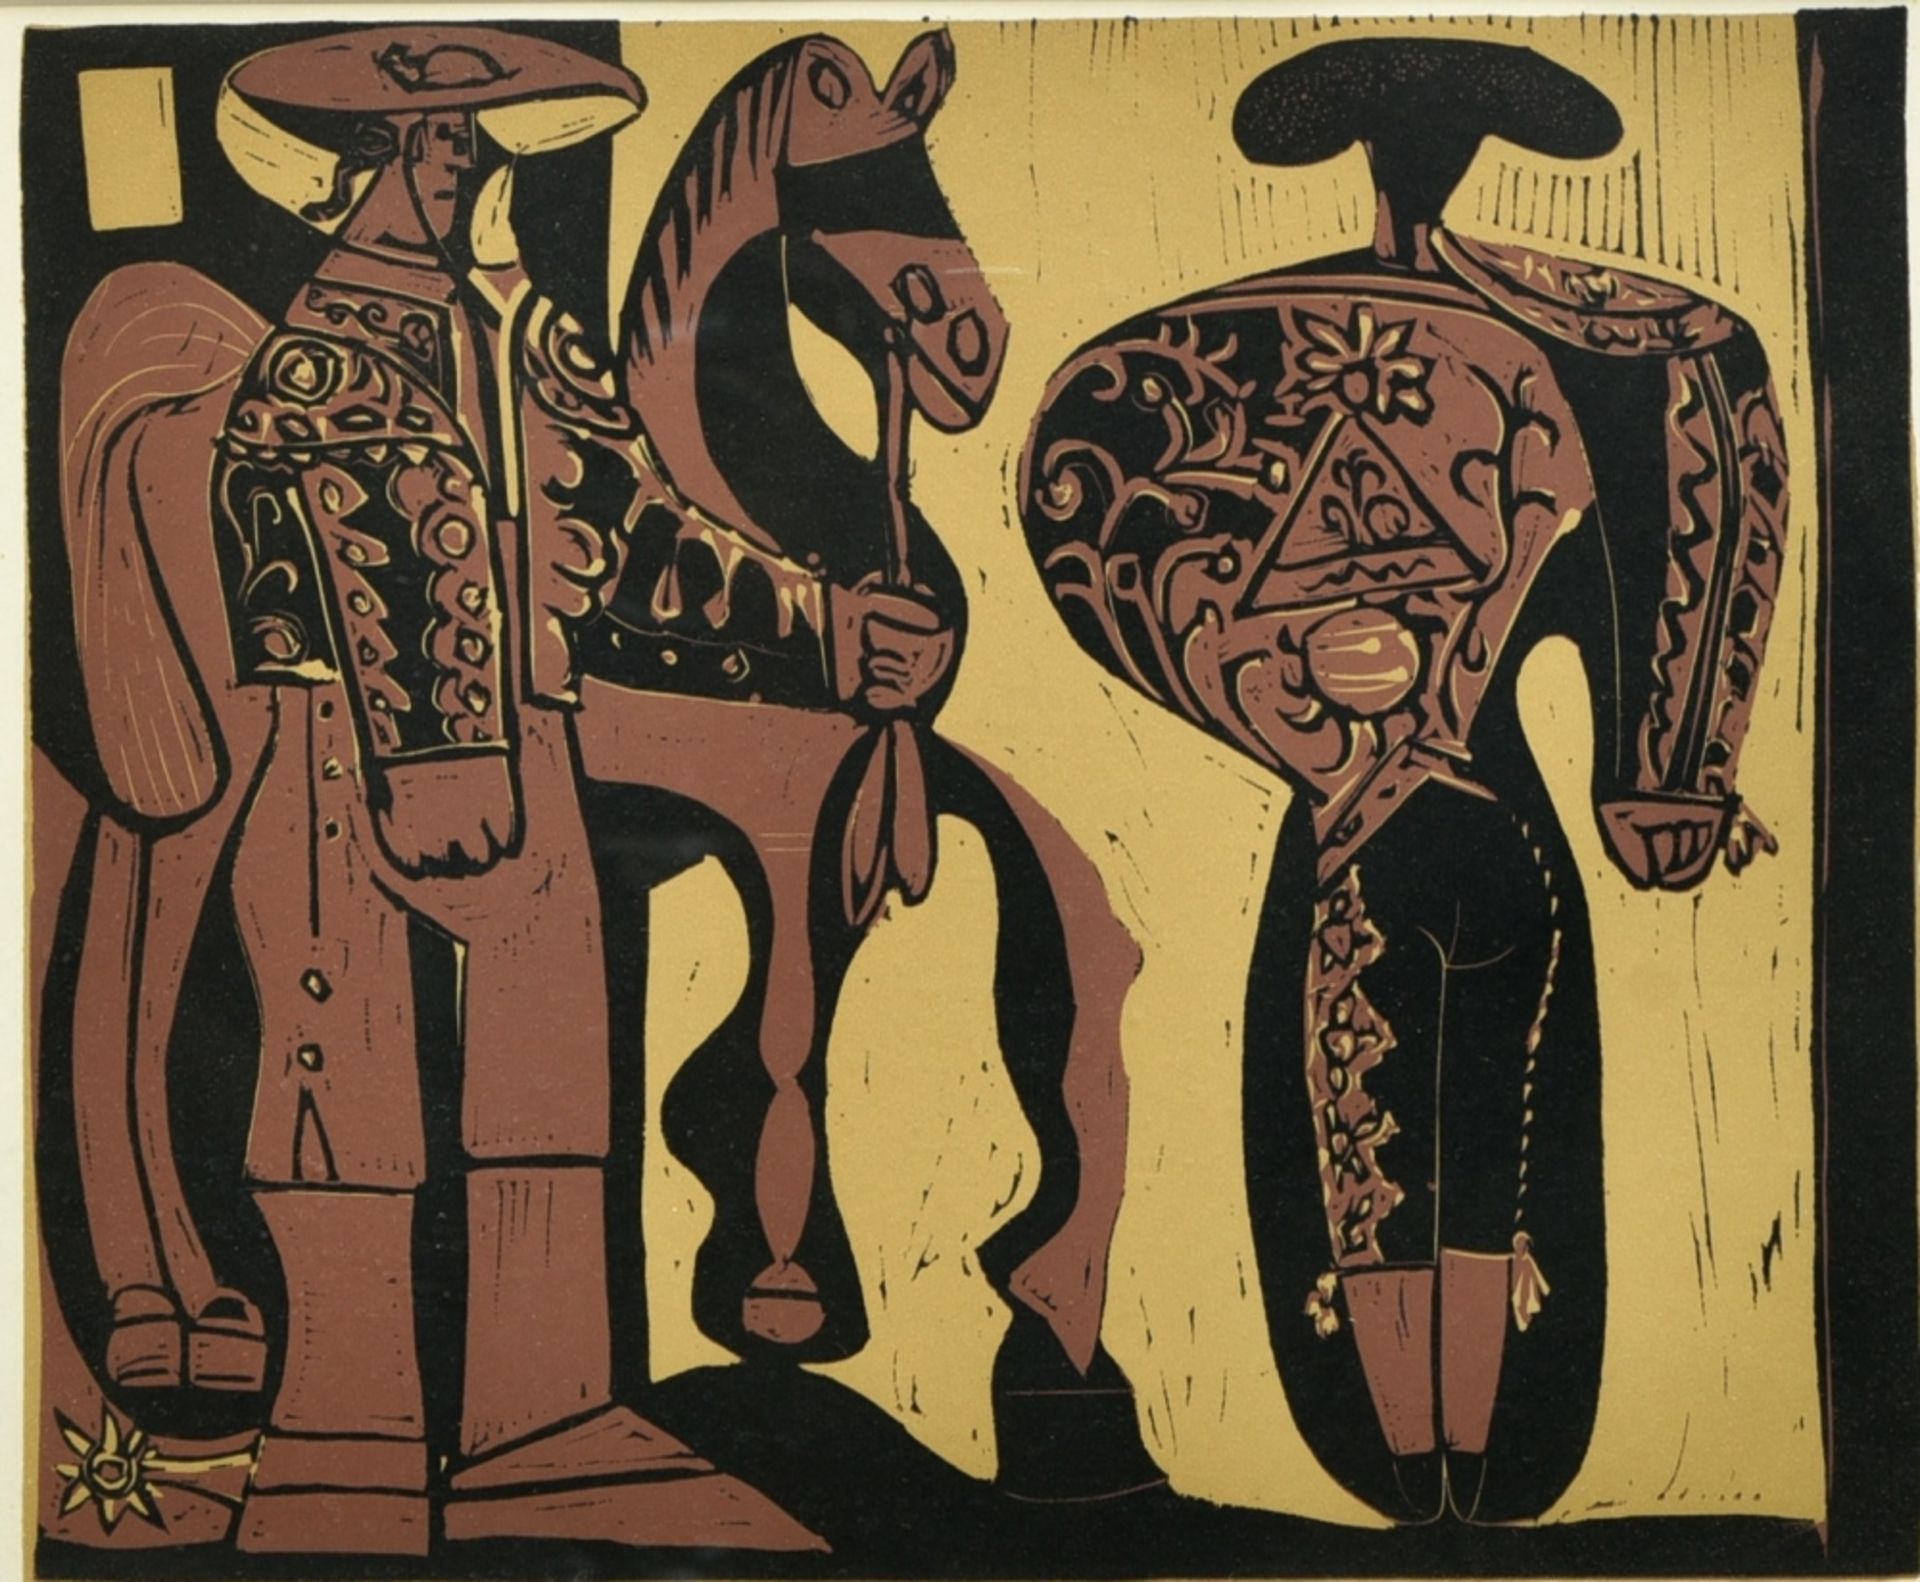 Pablo PICASSO (1881-1973), After. Picador and torero, 1959 colour linocut, issued by the Cercle d'